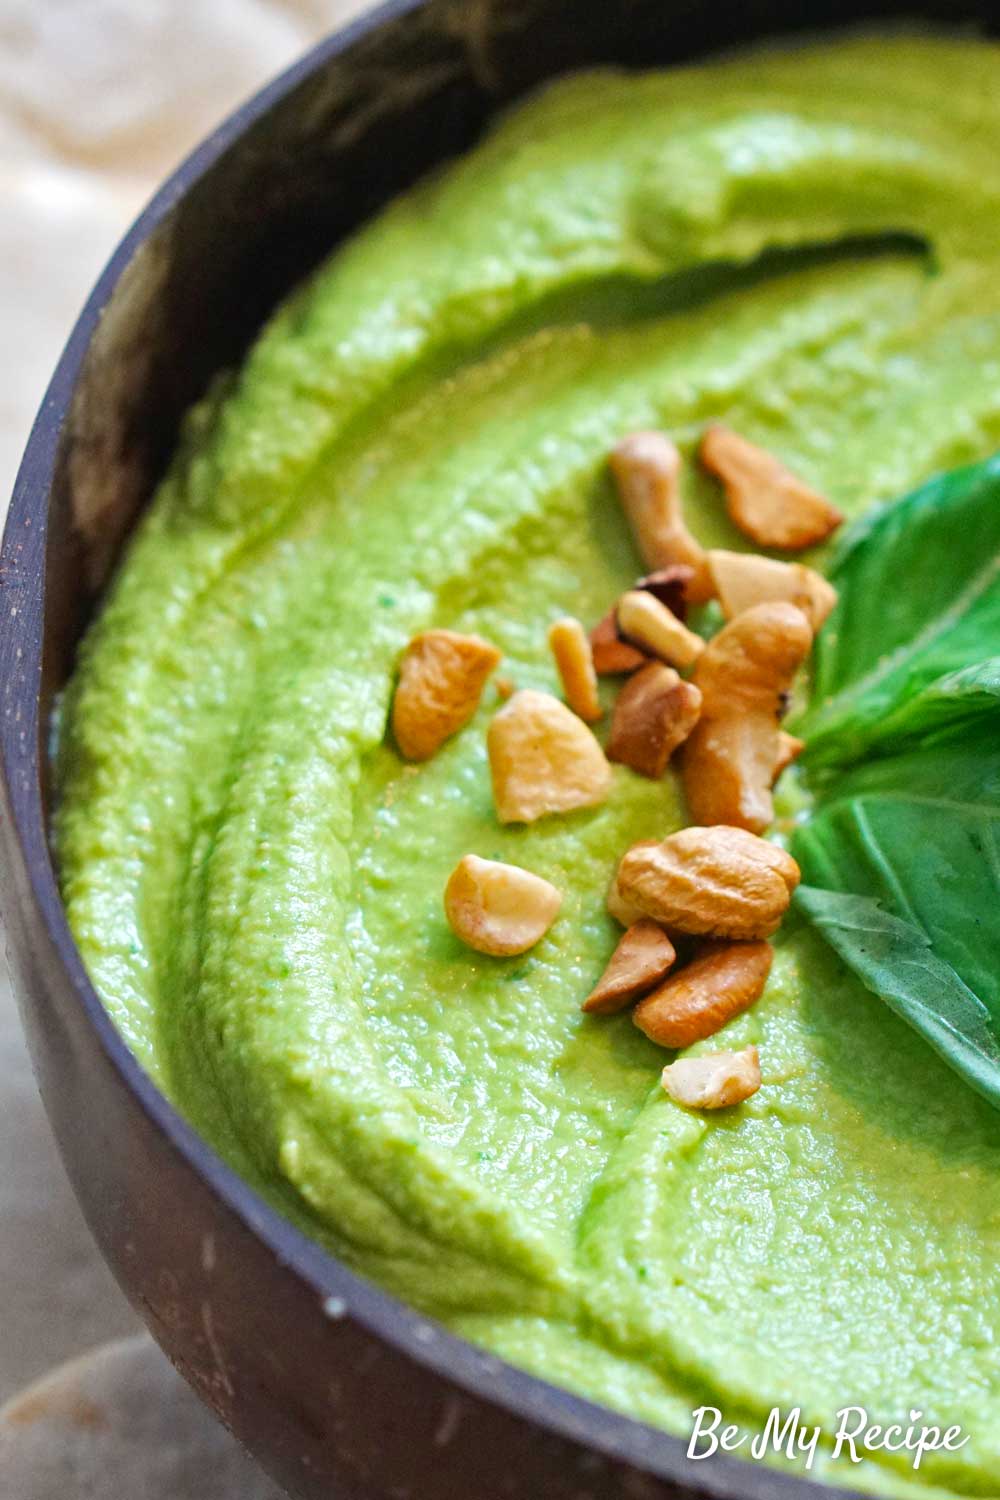 Basil Hummus Recipe That’s as Delicious as It Is Colorful